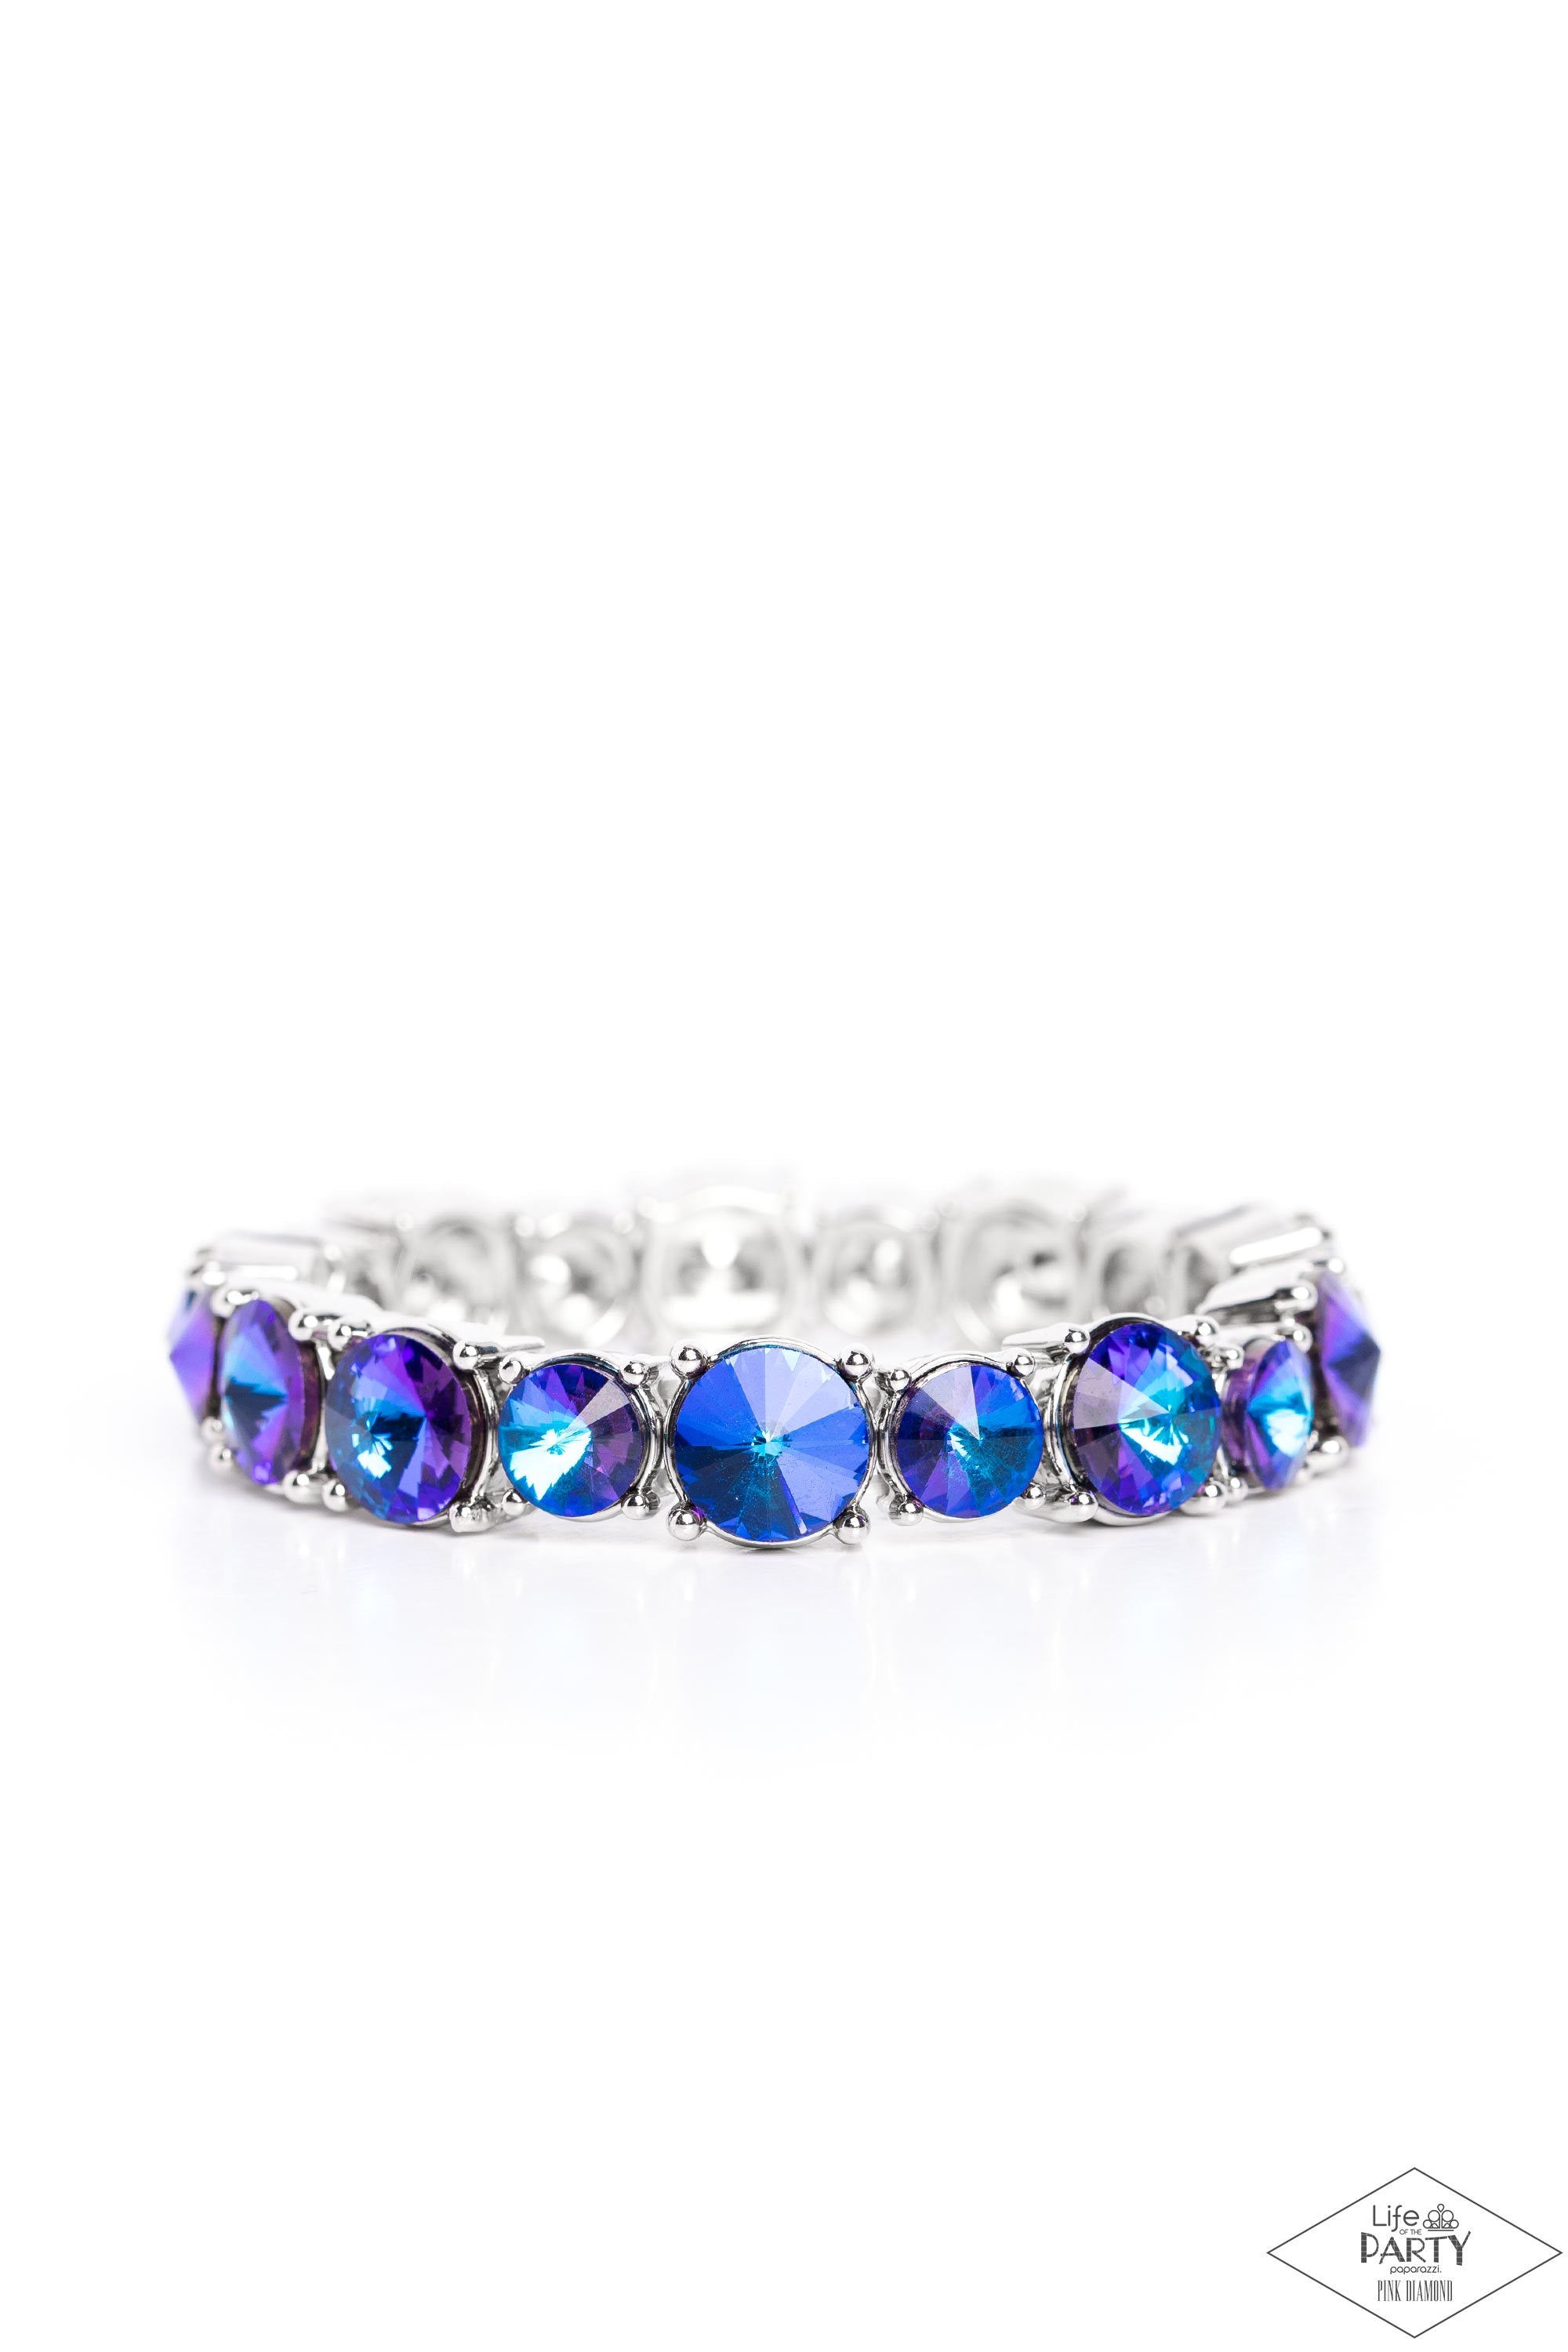 Born To Bedazzle Blue Oil Spill Rhinestone Bracelet - Paparazzi Accessories- lightbox - CarasShop.com - $5 Jewelry by Cara Jewels